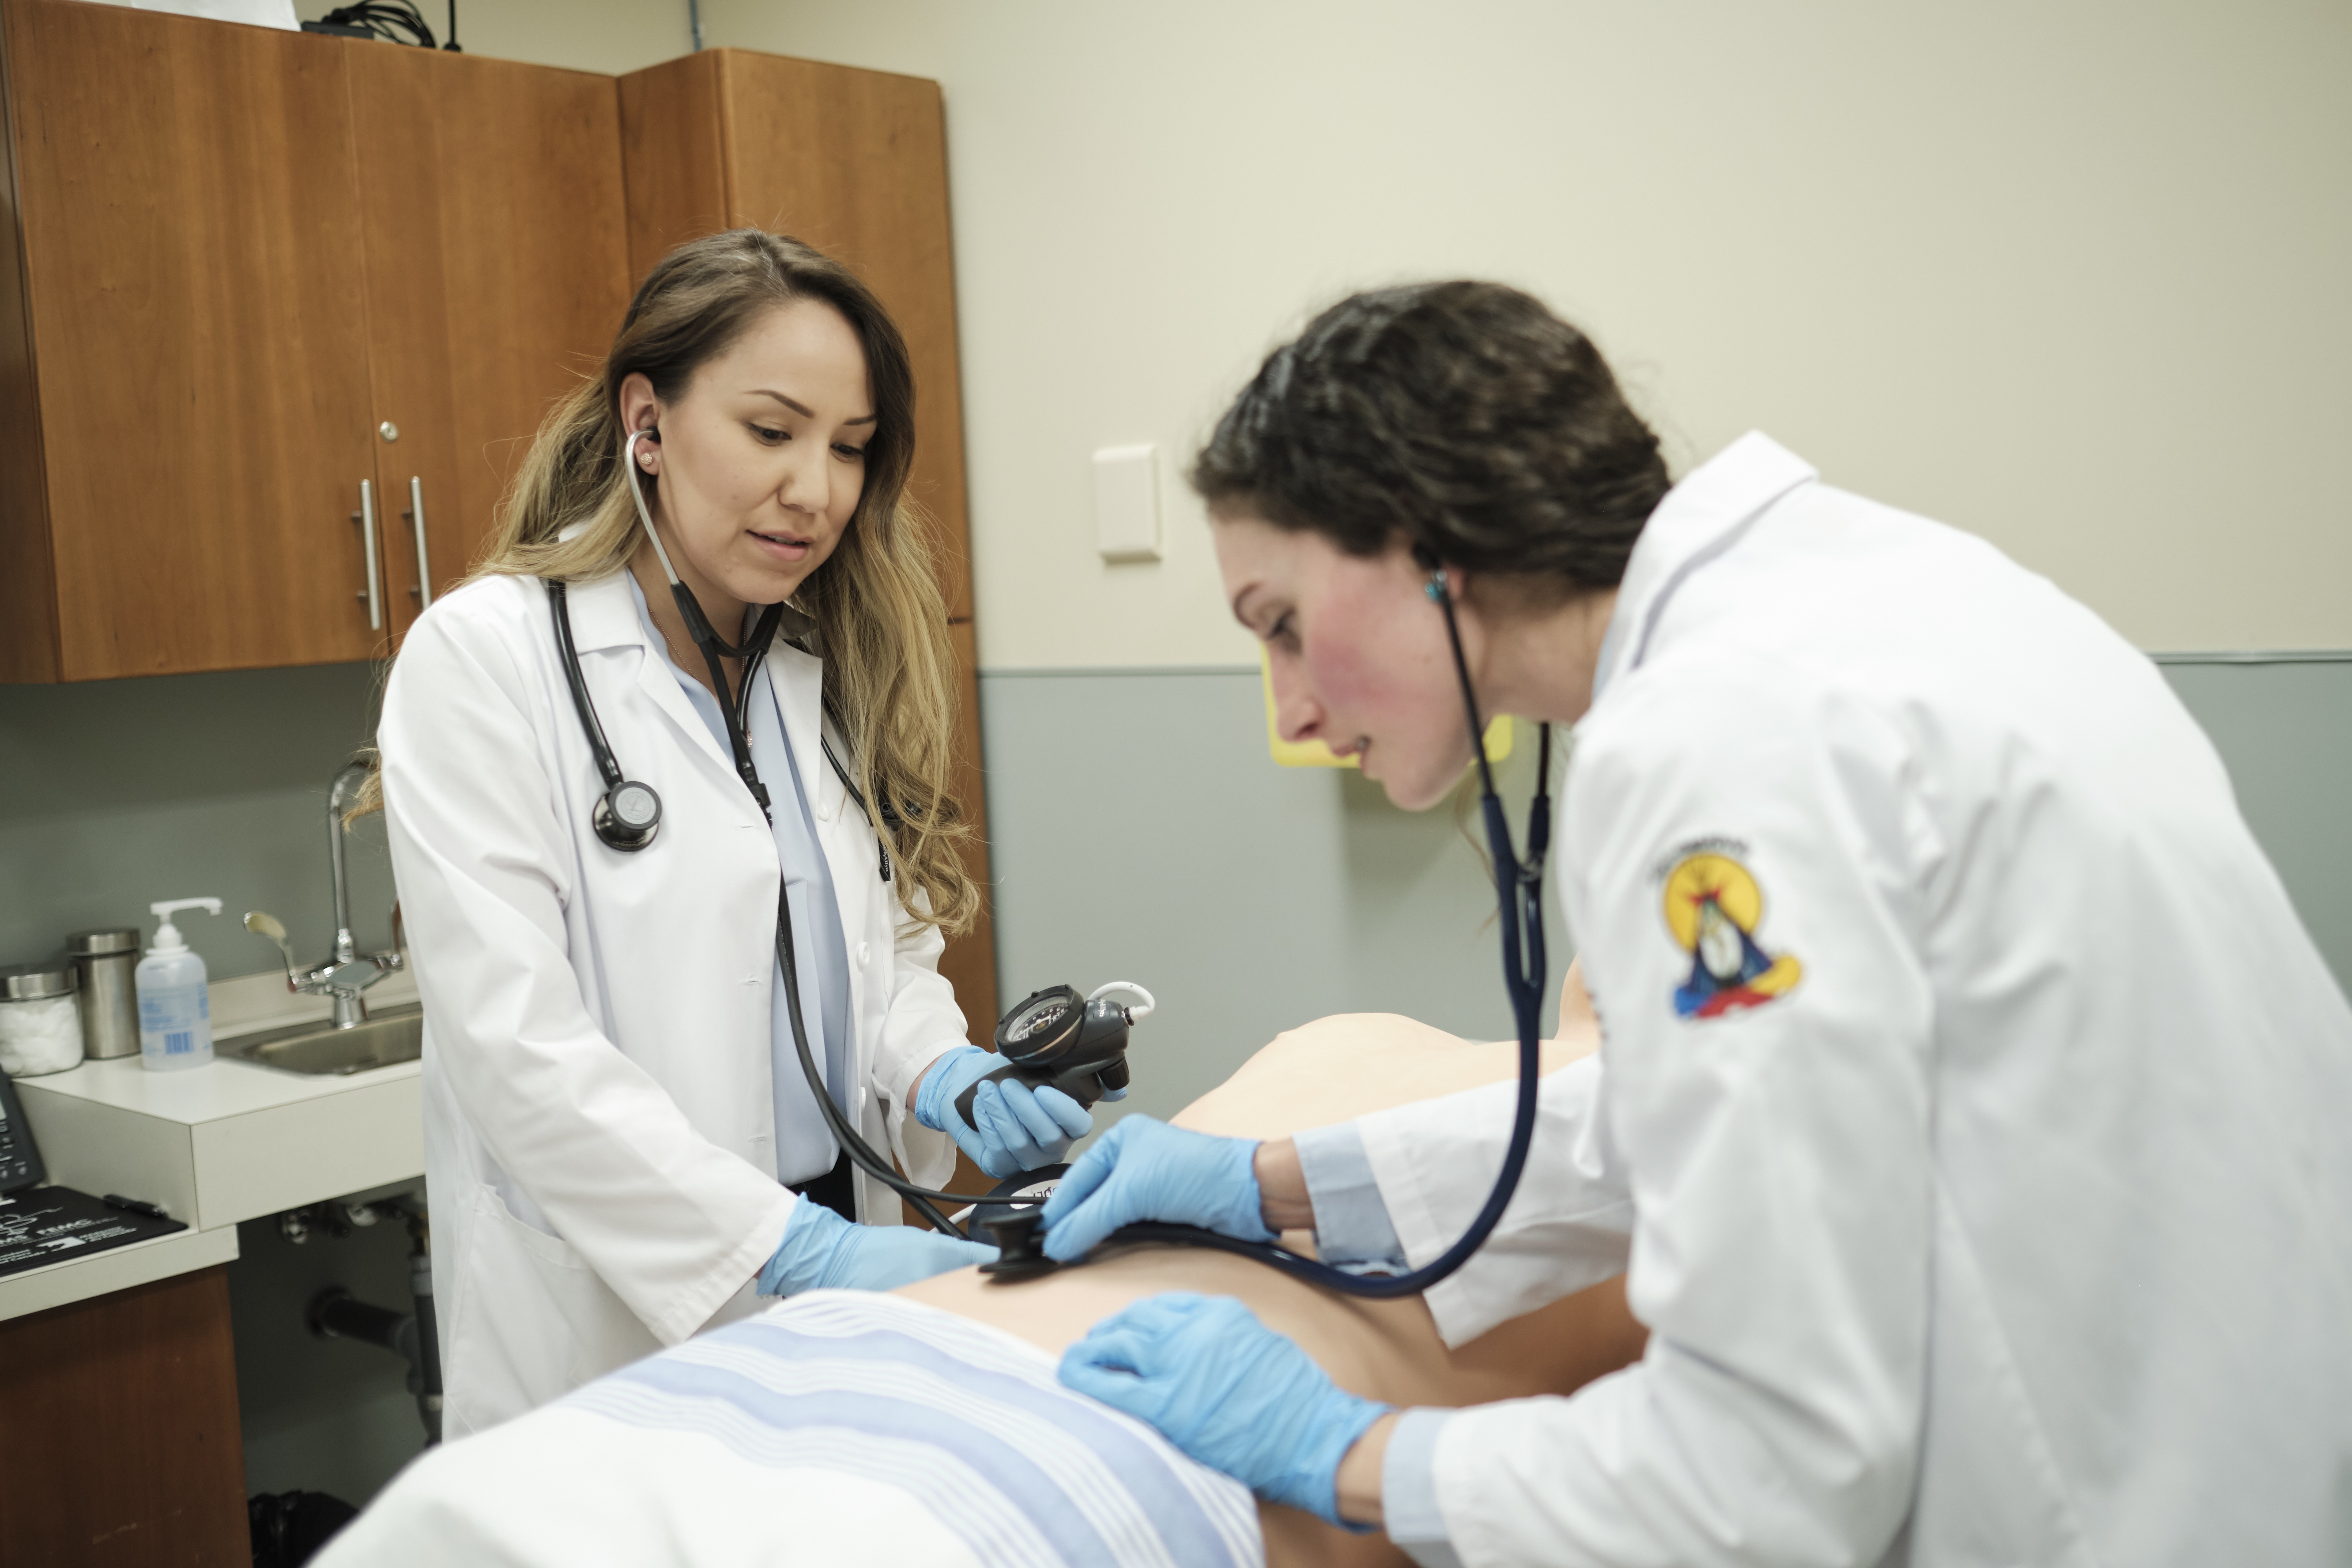 A new residency program in medical oncology will give post-graduate medical students an opportunity to train in cancer care. (Photo: David Stobbe)